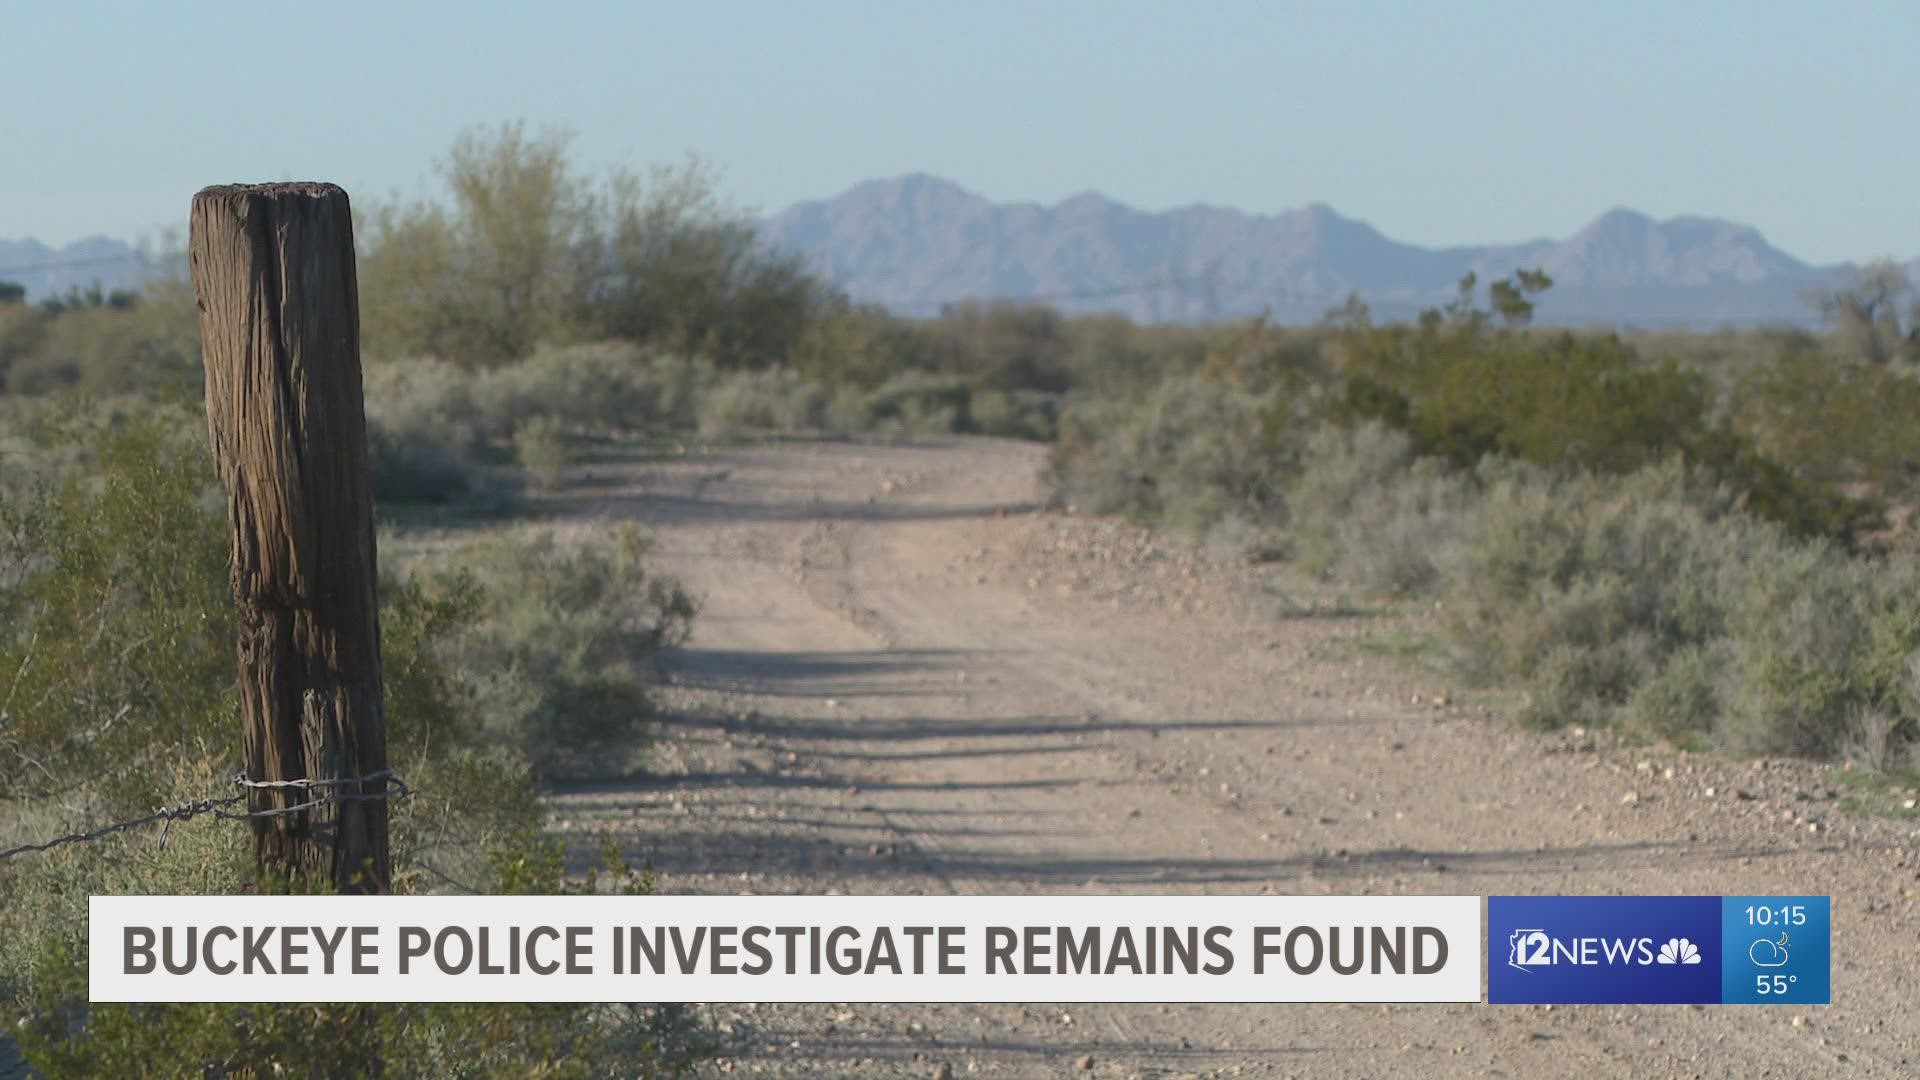 Skeletal remains, including a skull and other bones, were found in a remote desert area in Buckeye, according to police.